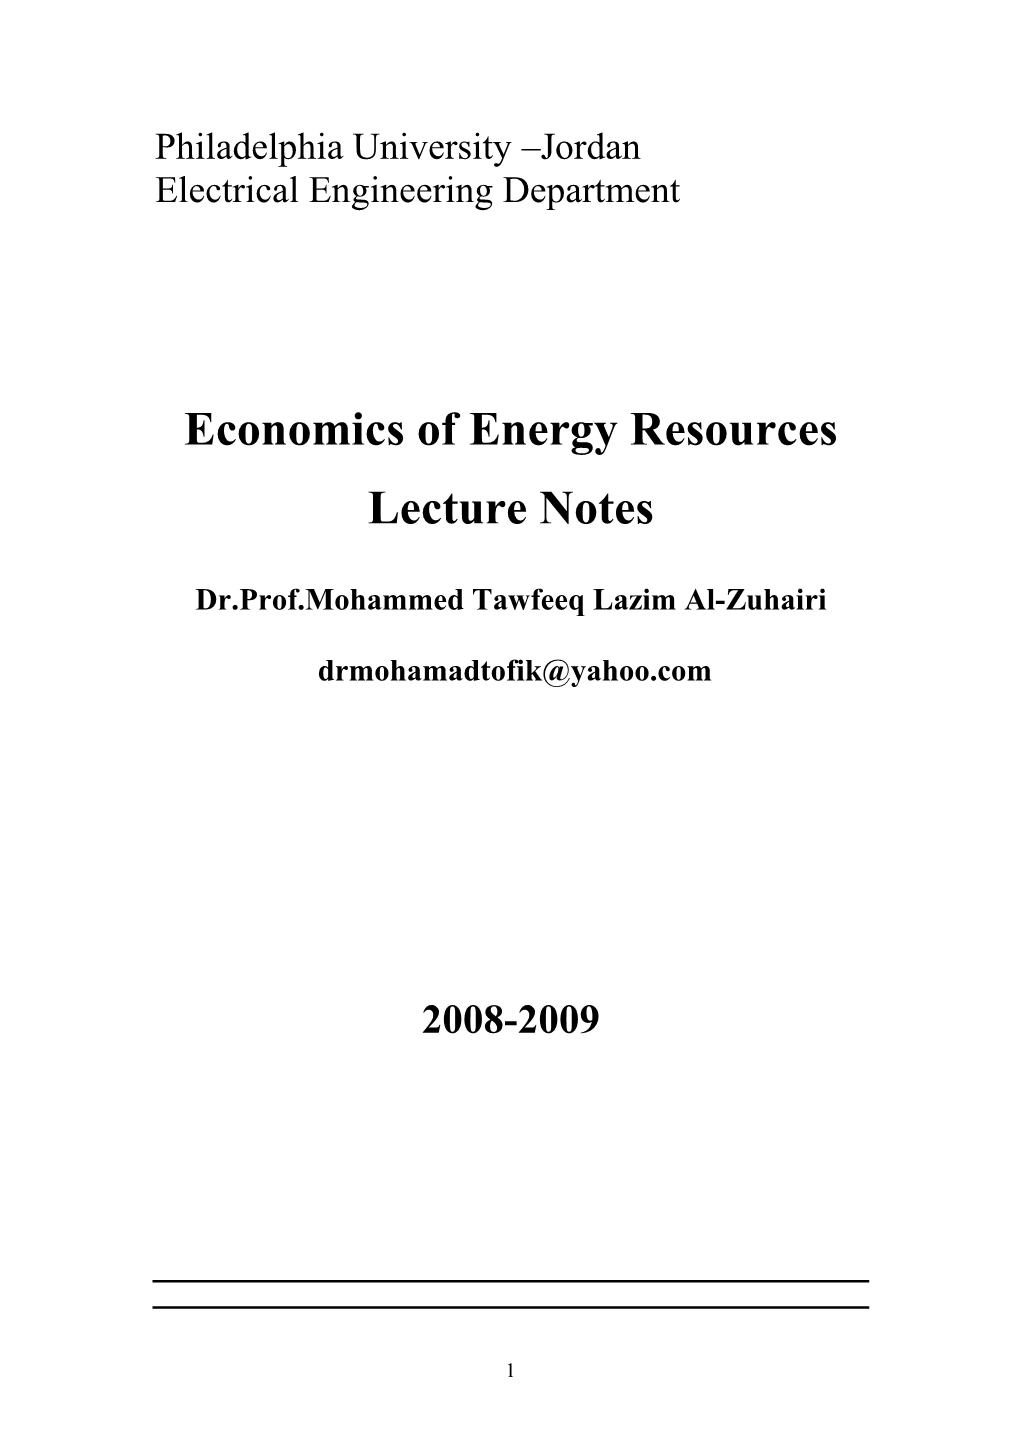 Economics of Energy Resources Lecture Notes